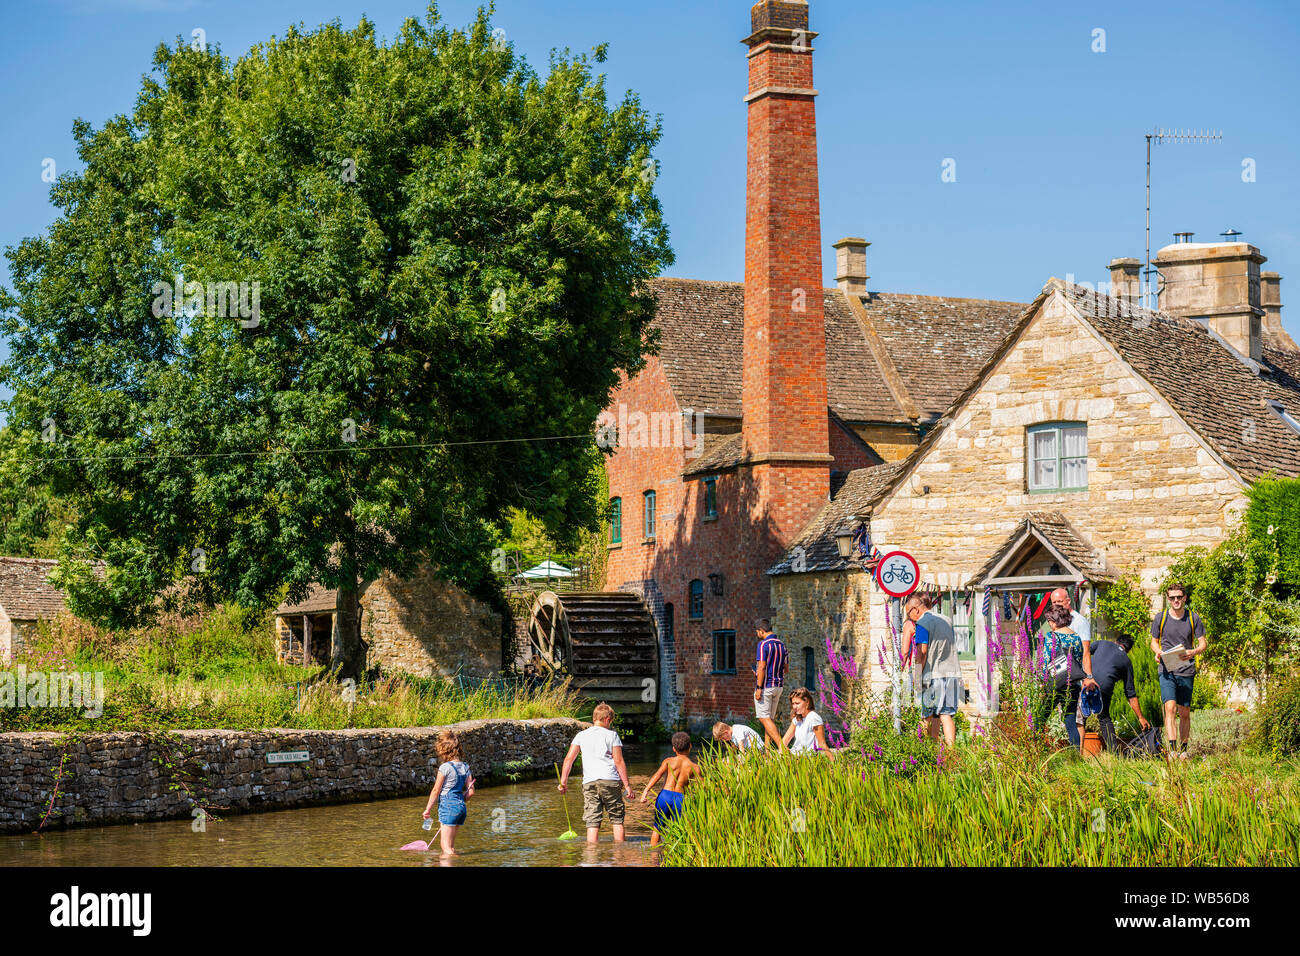 Bambini sguazzare nel fiume, Lower Slaughter, Cotswolds, UK. Foto Stock